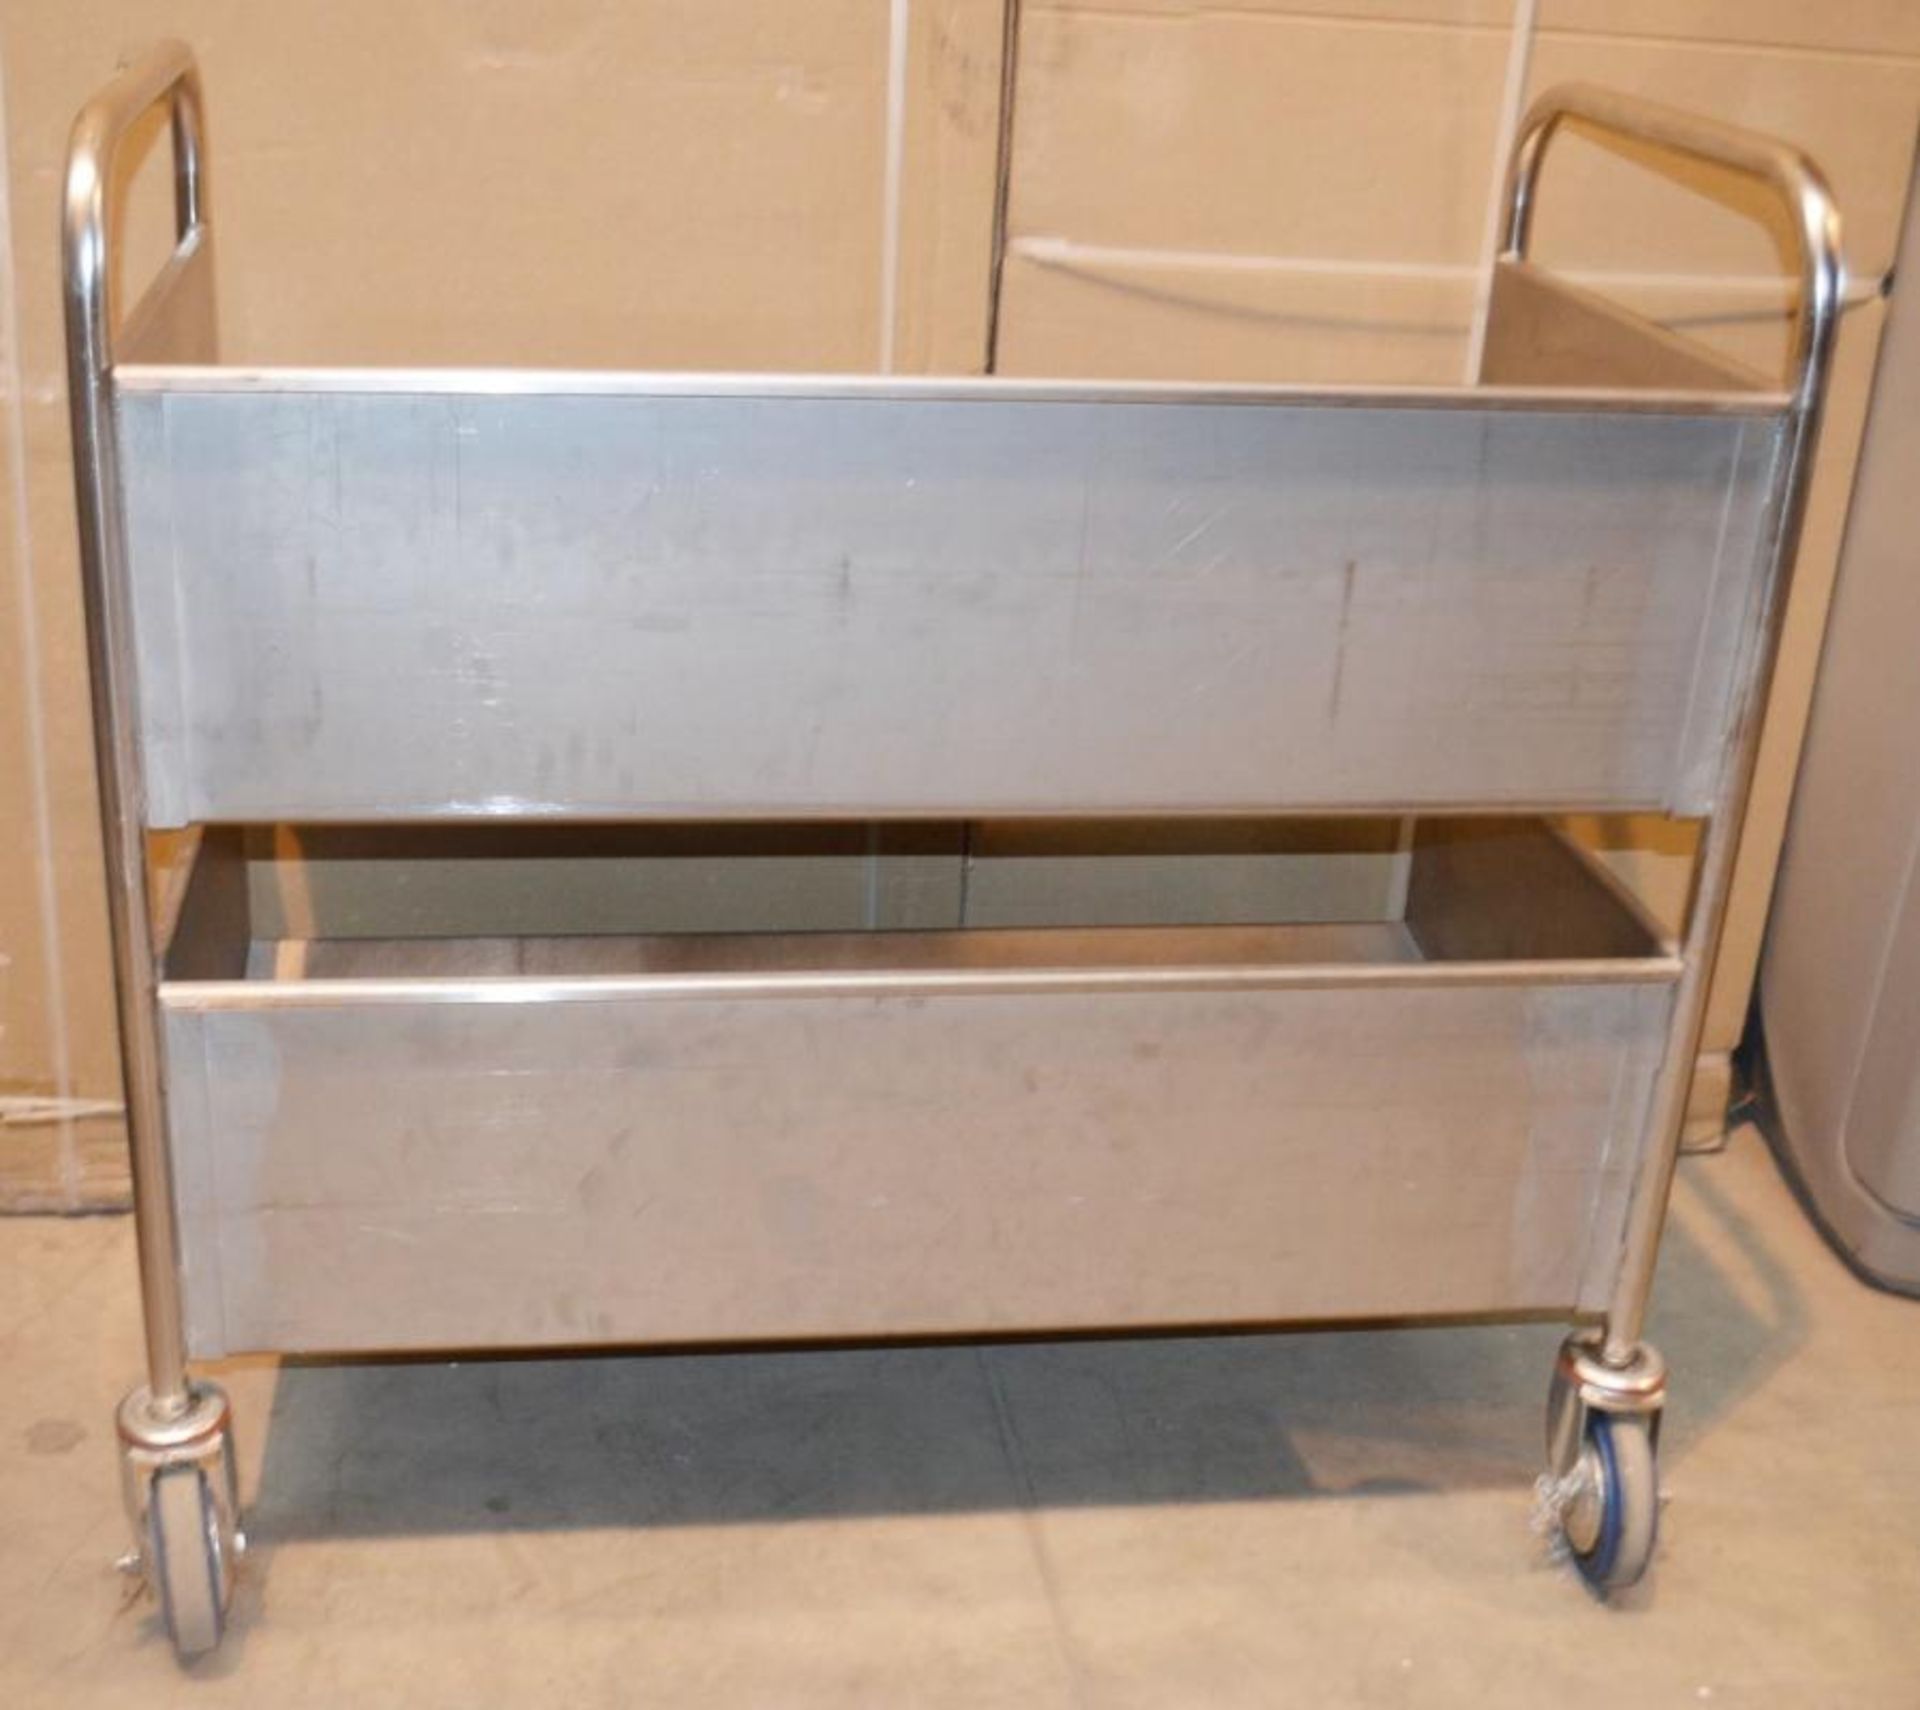 1 x Stainless Steel Commercial Kitchen Trolley With Slanted Shelves - Dimensions: W100 x D50 x H97cm - Image 4 of 5